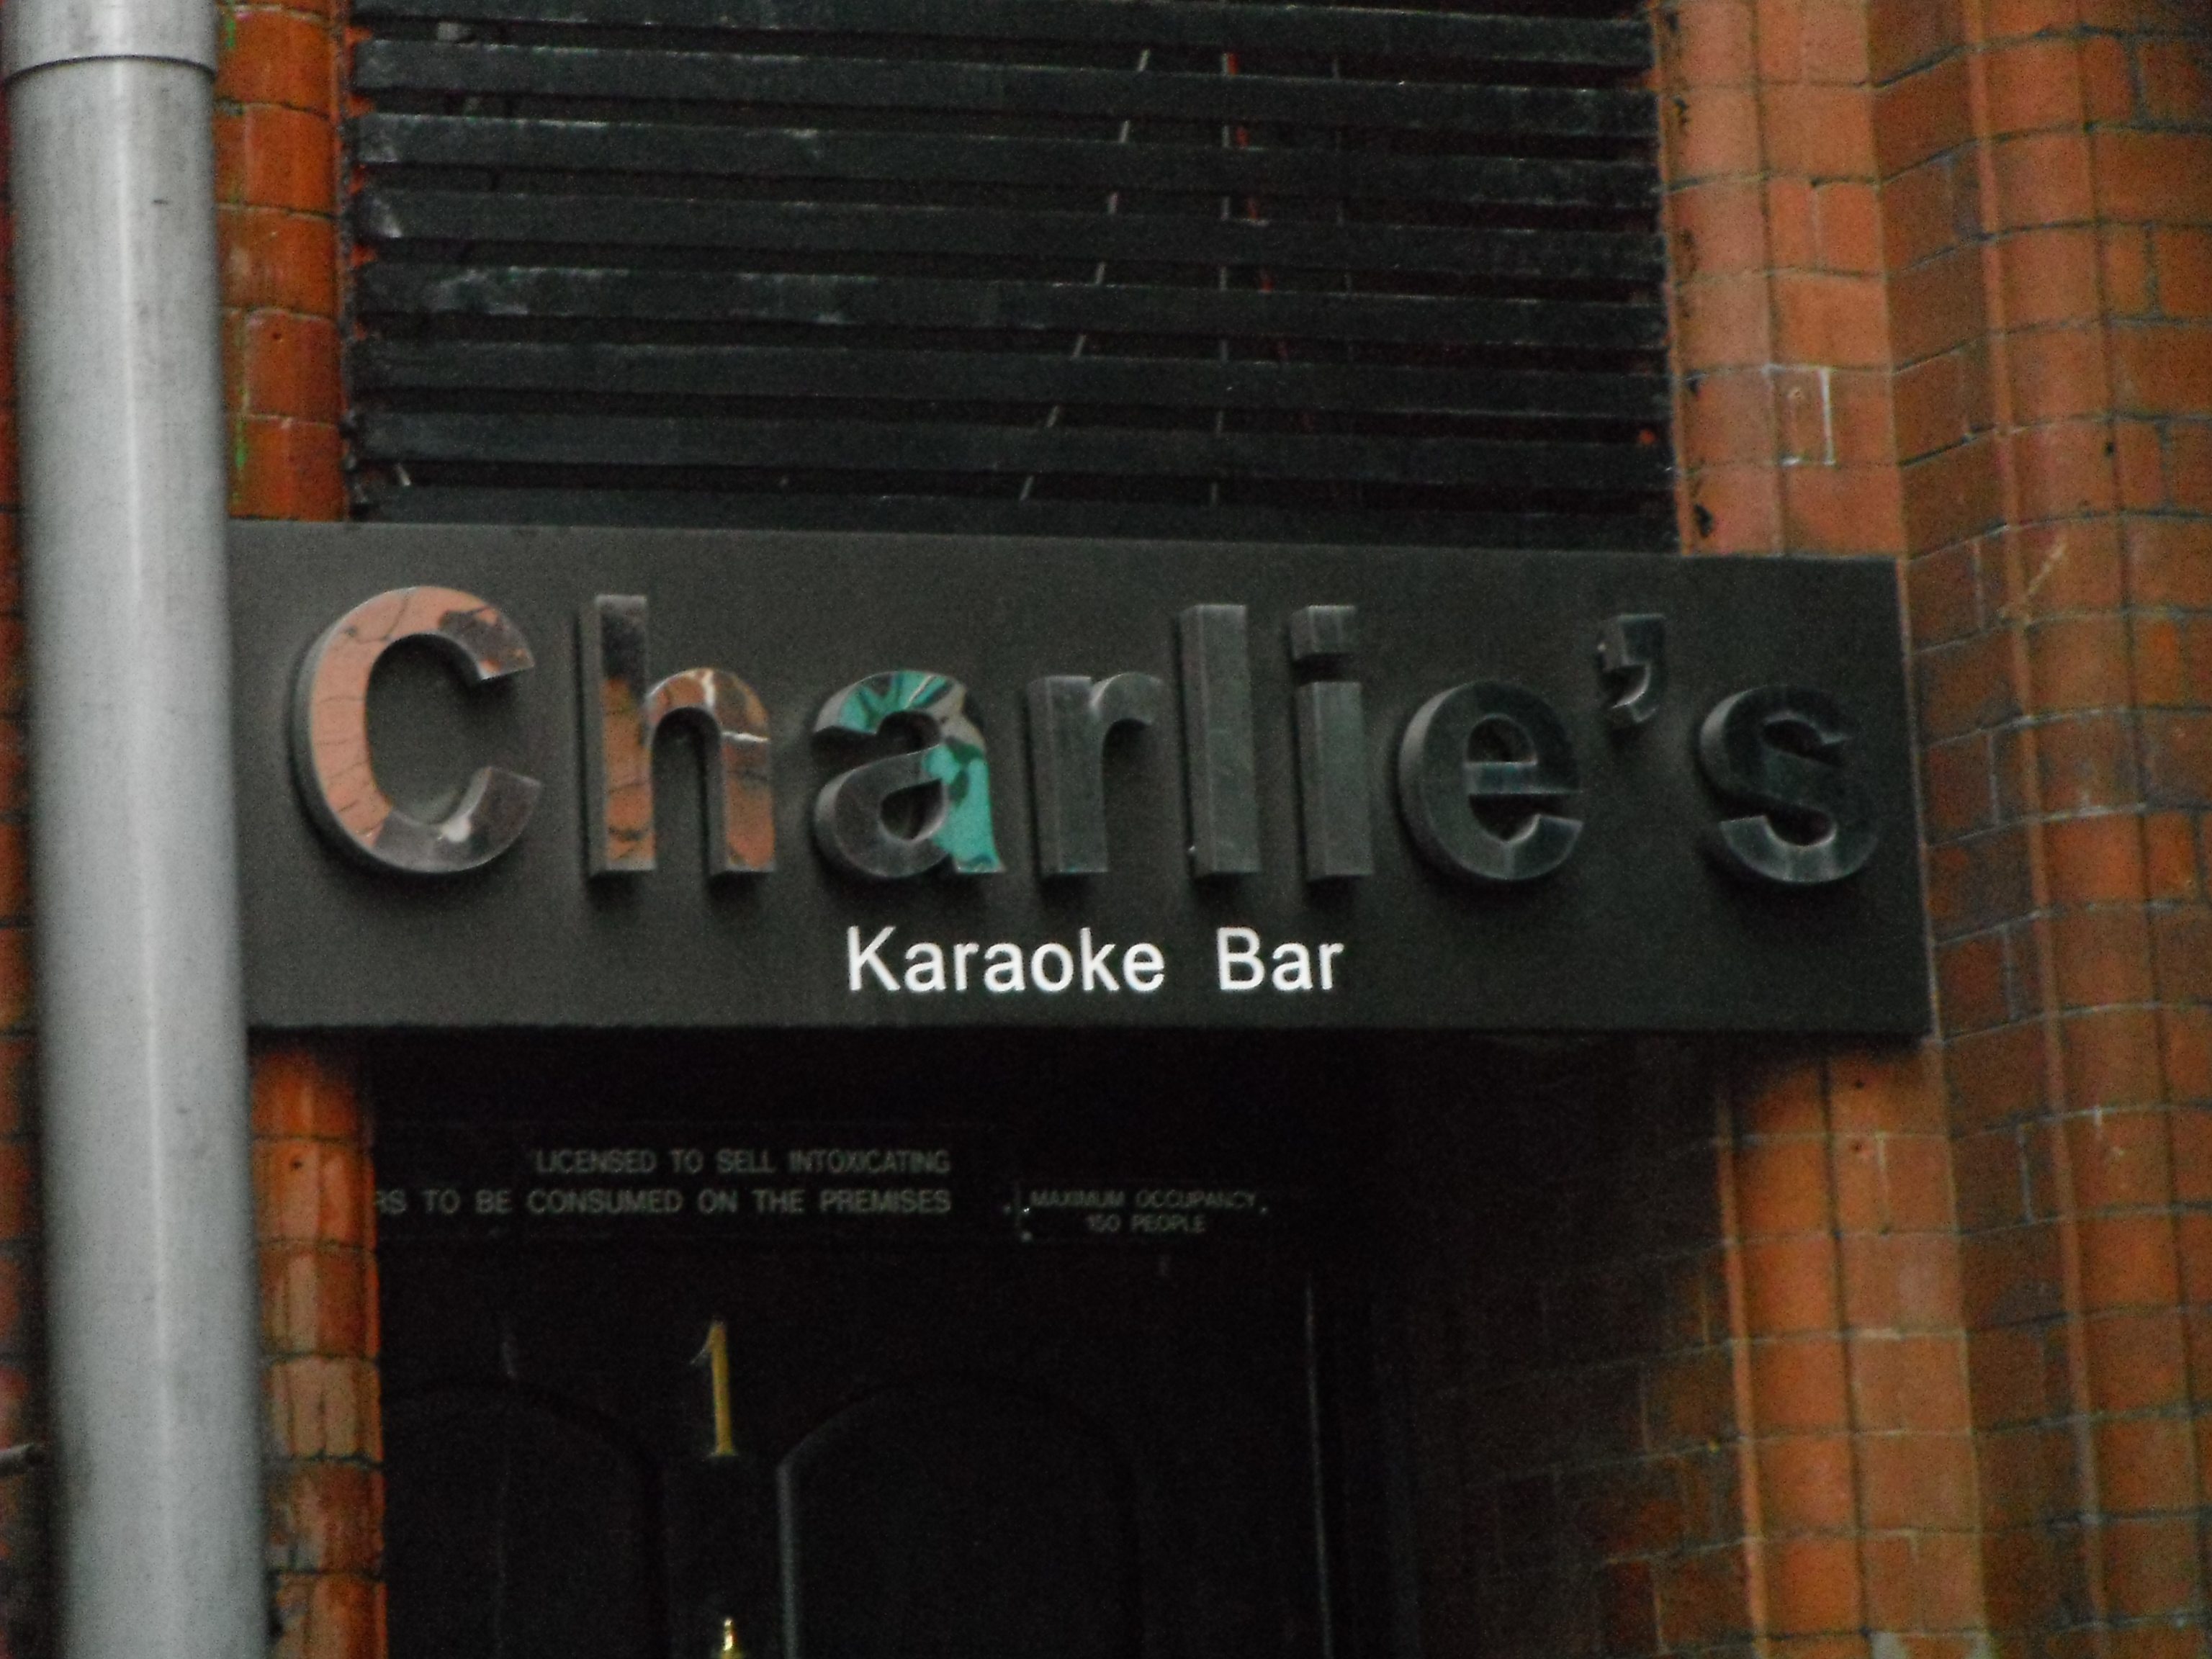 Photo taken by me – Charlie’s Bar, Manchester 